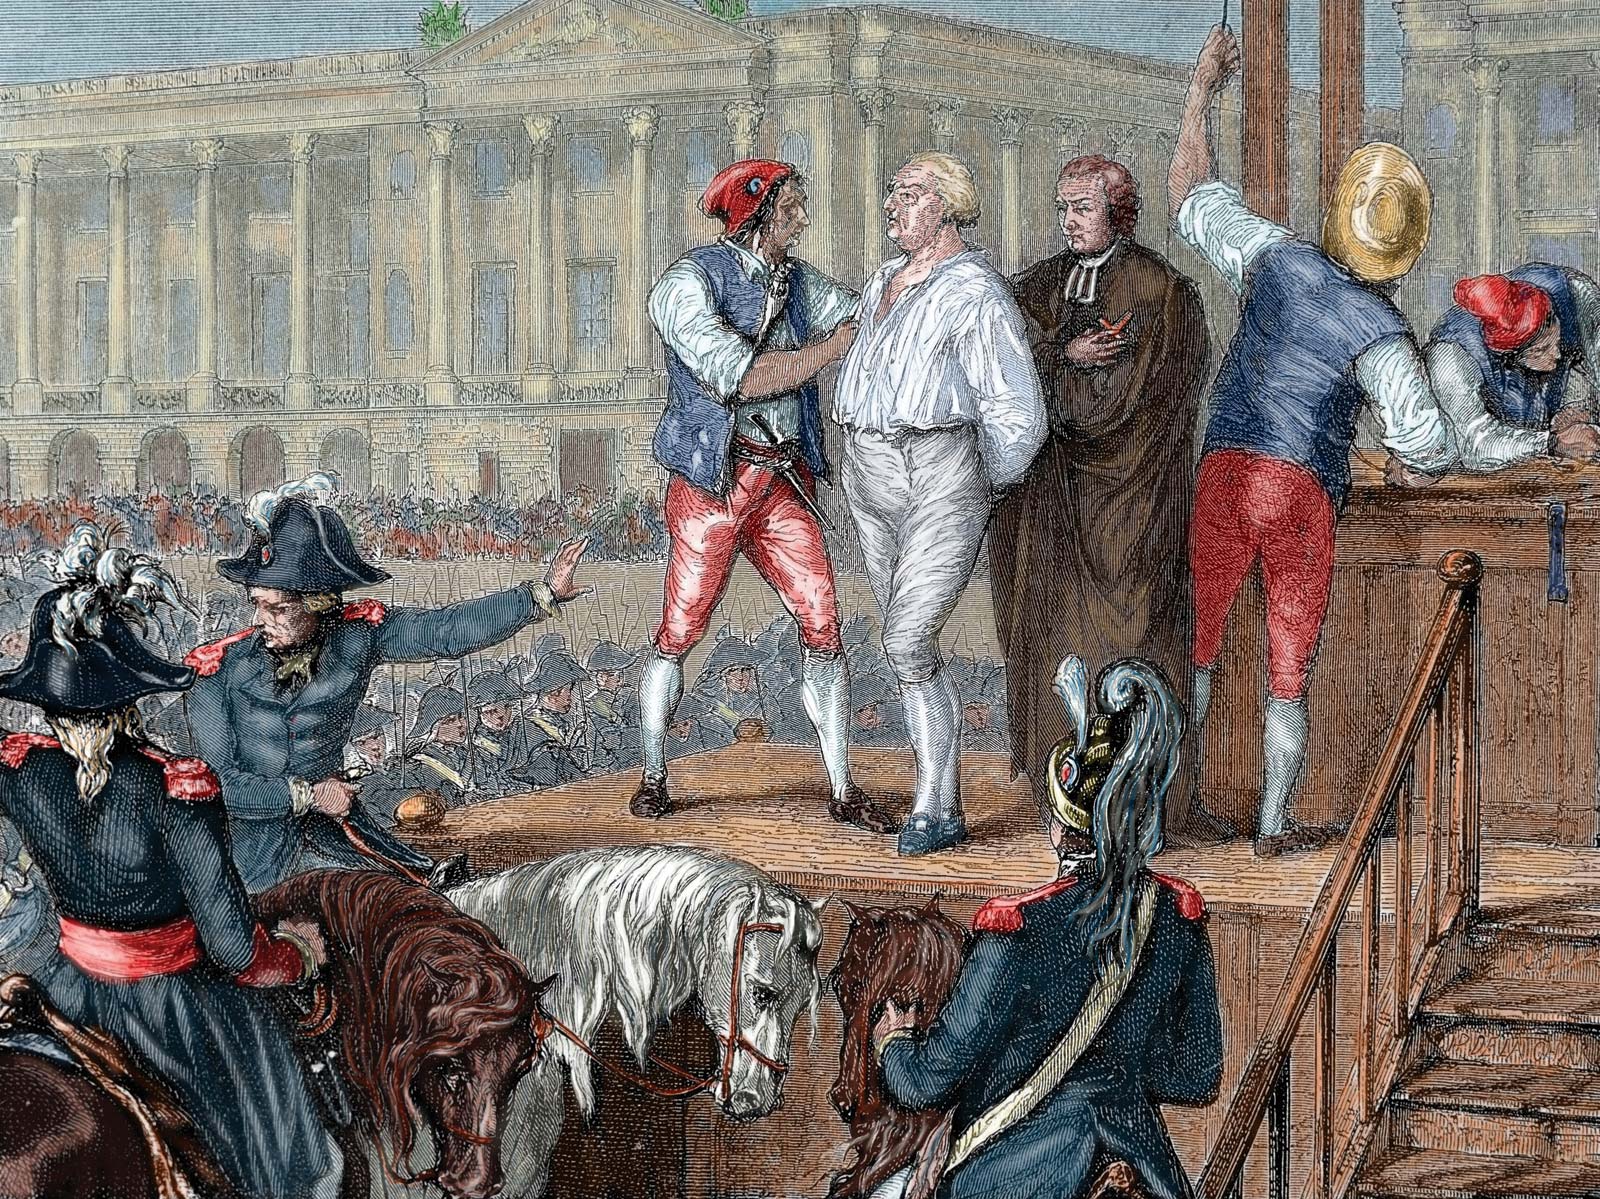 The execution of Louis XVI in 1793